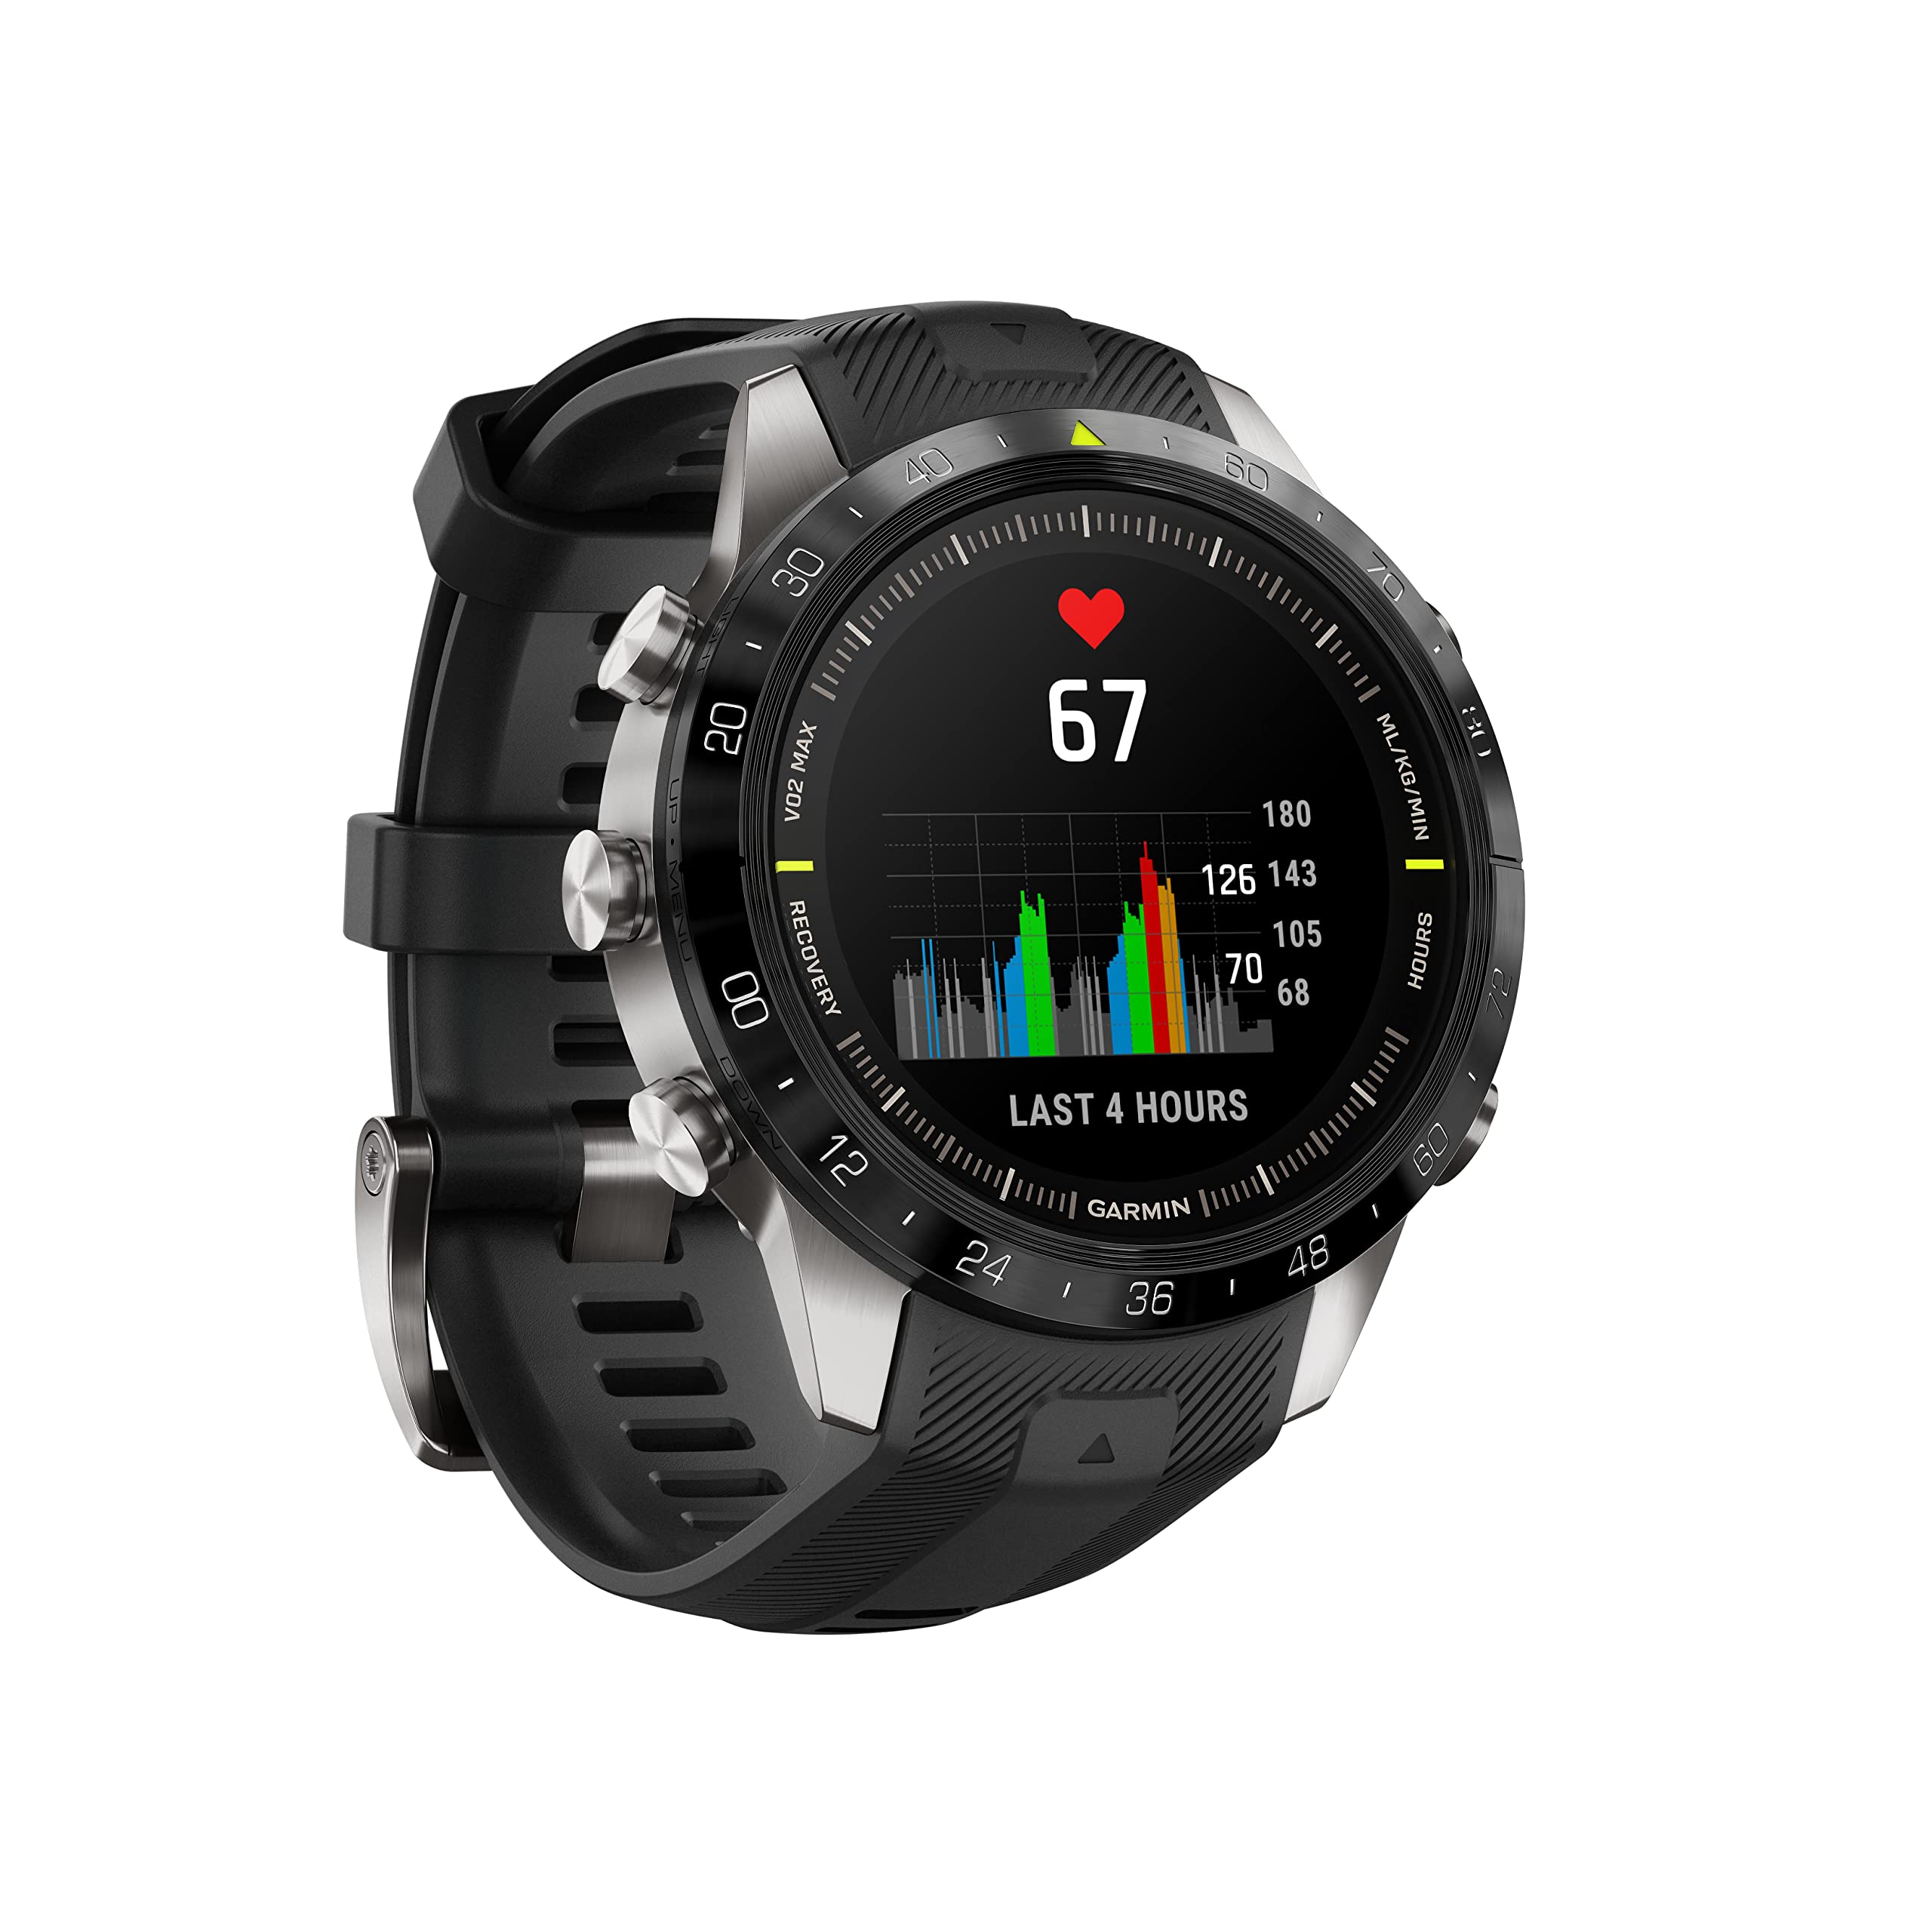 Garmin MARQ Athlete, Men's Luxury Tool Watch Built with Premium Materials for Athletes, Shows Recovery Time, VO2 Max and Performance Status